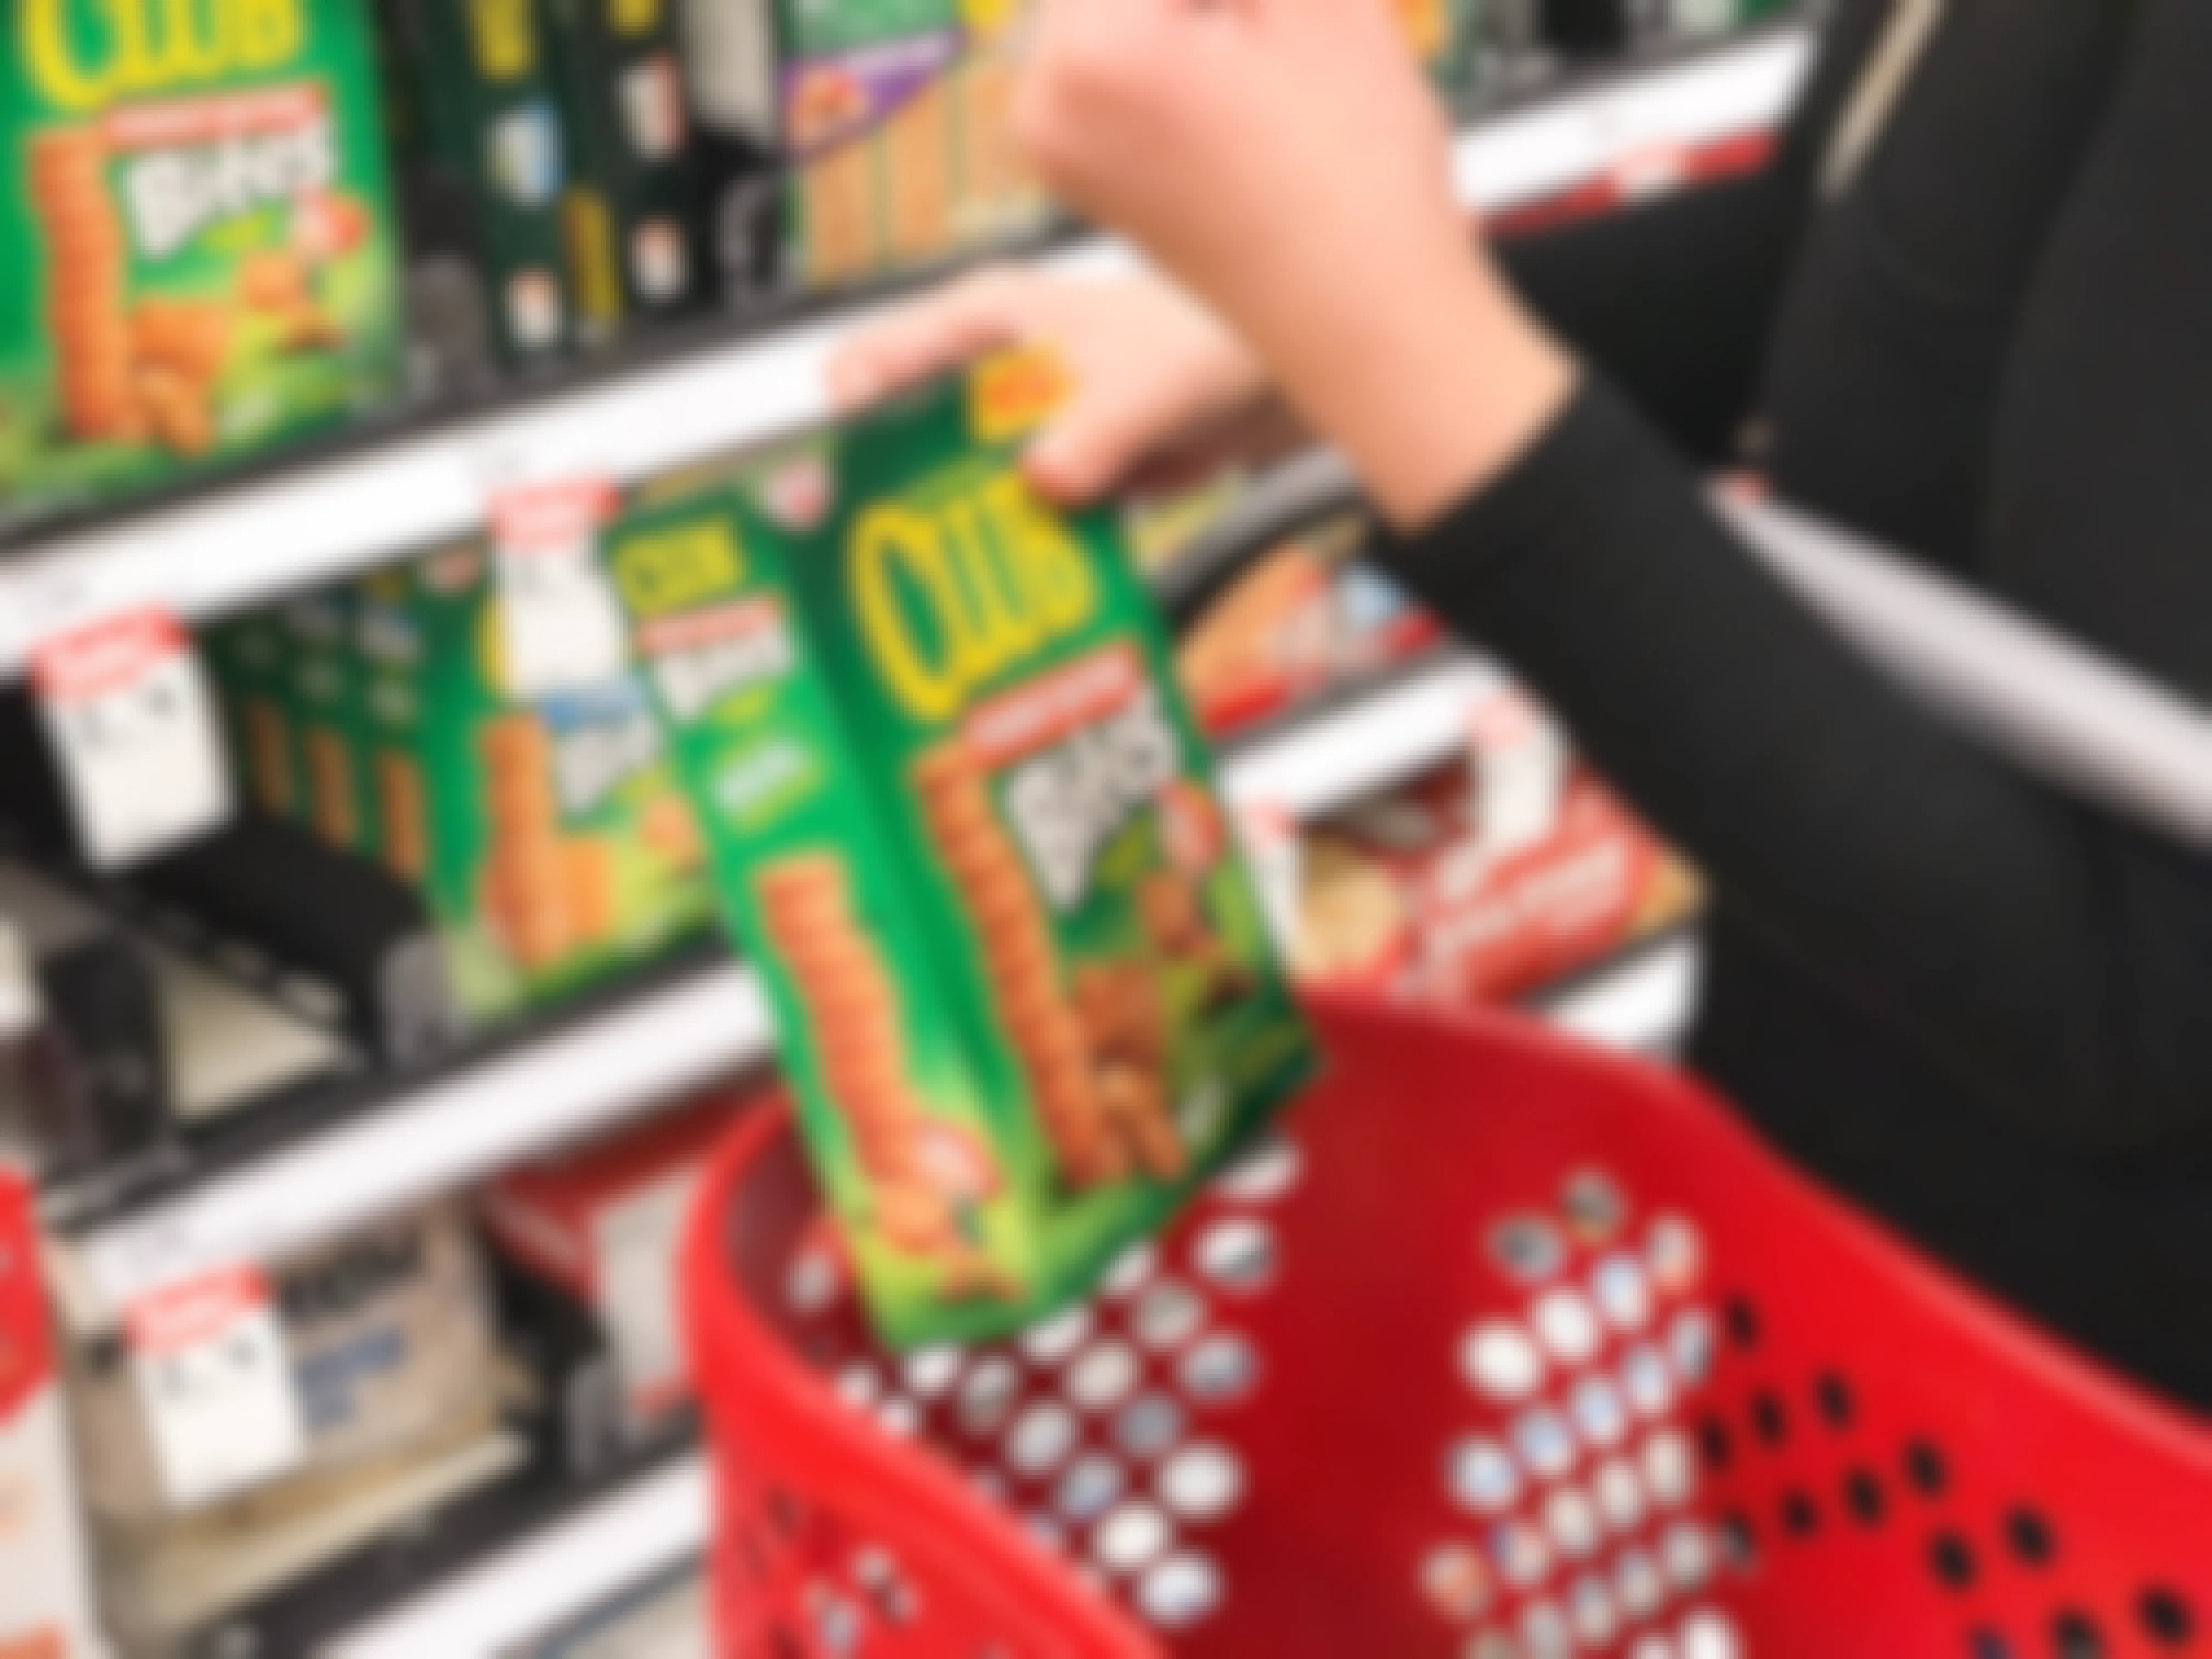 A person holding a Target shopping basket and placing a box of Club peanut butter bites crackers into it.